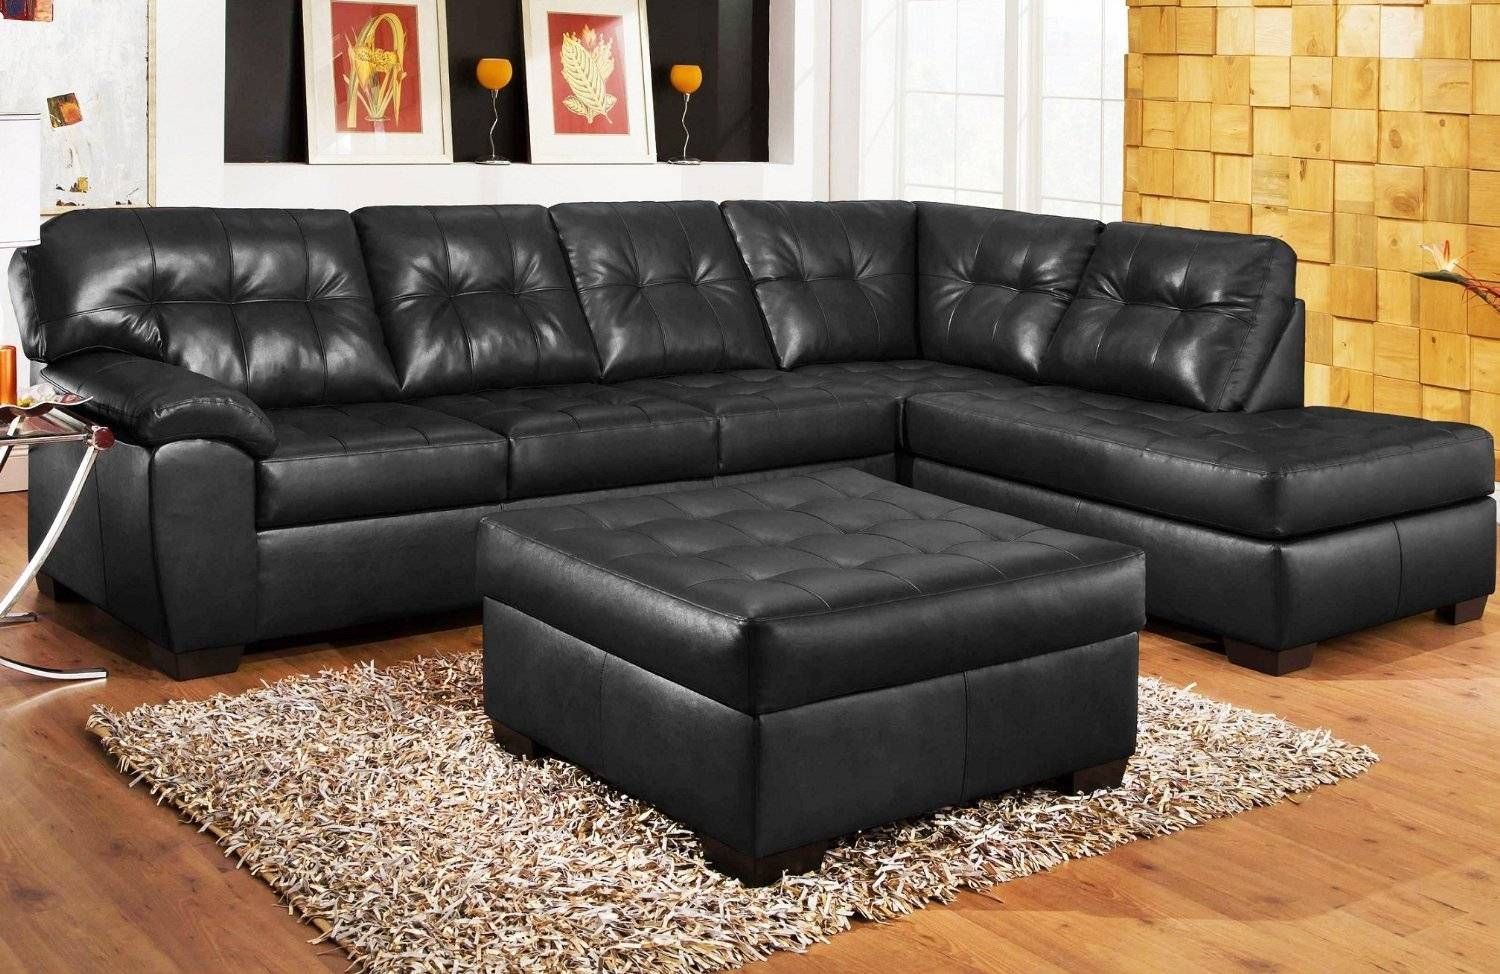 Featured Photo of 30 The Best Black Leather Sectional Sleeper Sofas